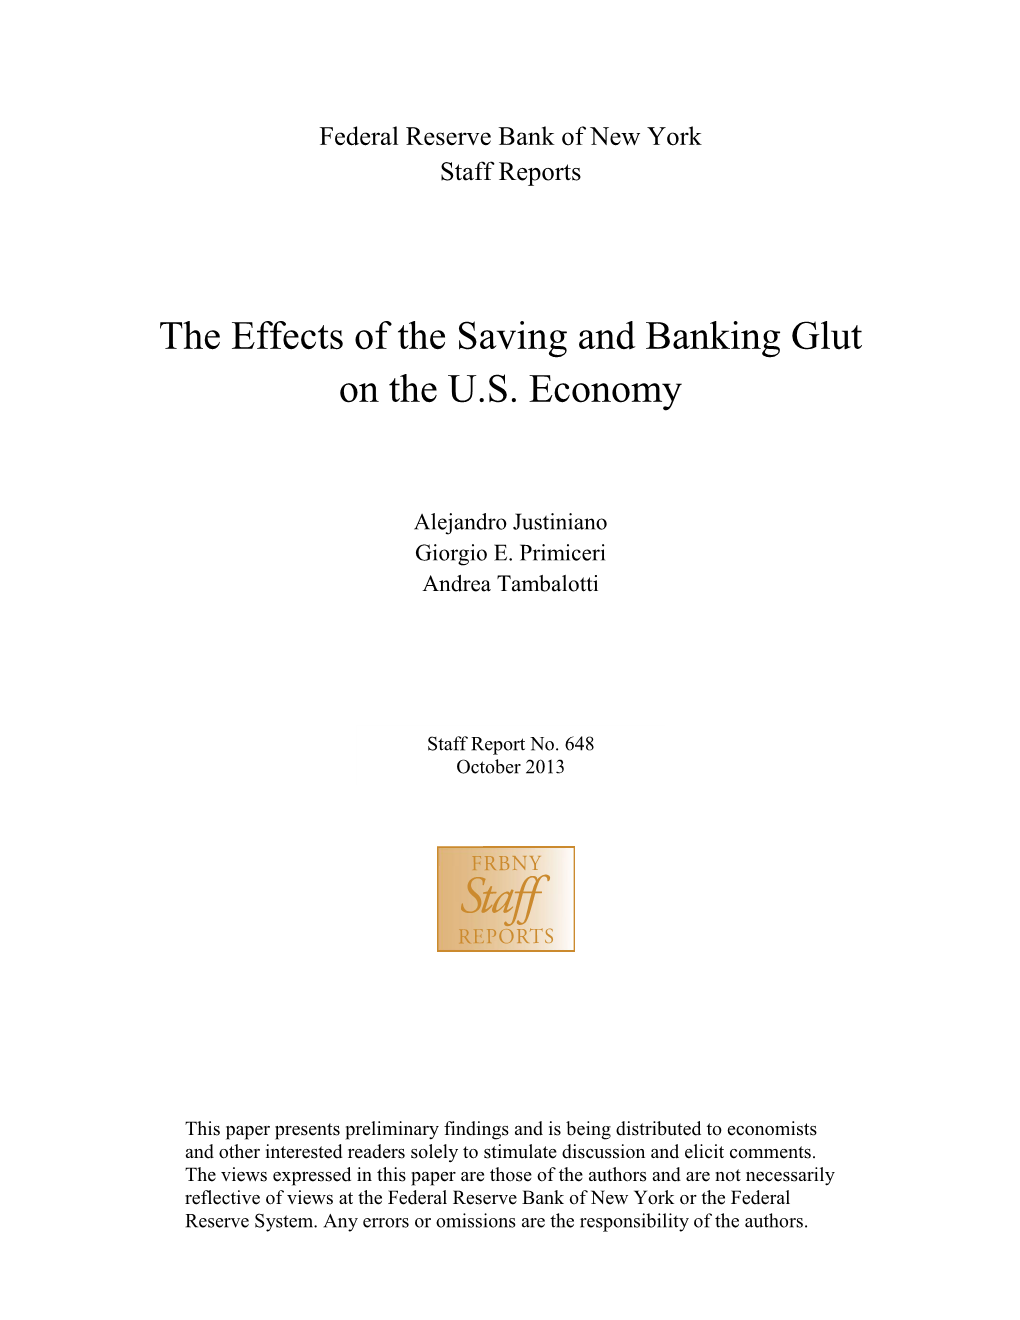 The Effects of the Saving and Banking Glut on the U.S. Economy